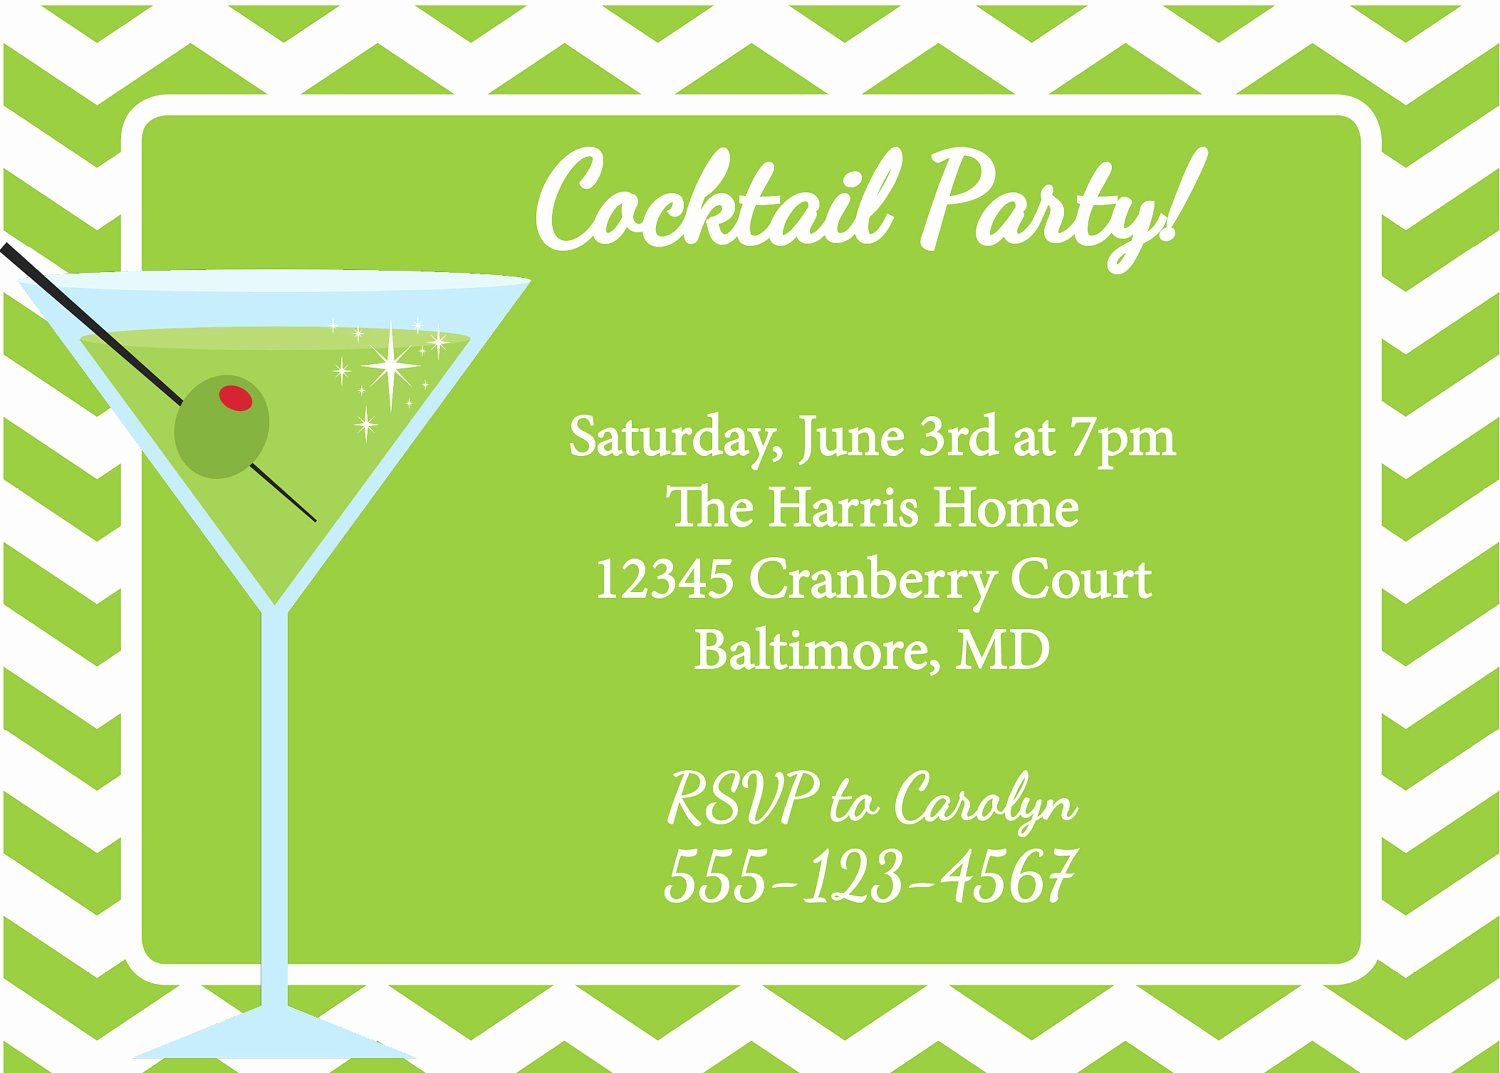 Cocktail Party Invitation Templates